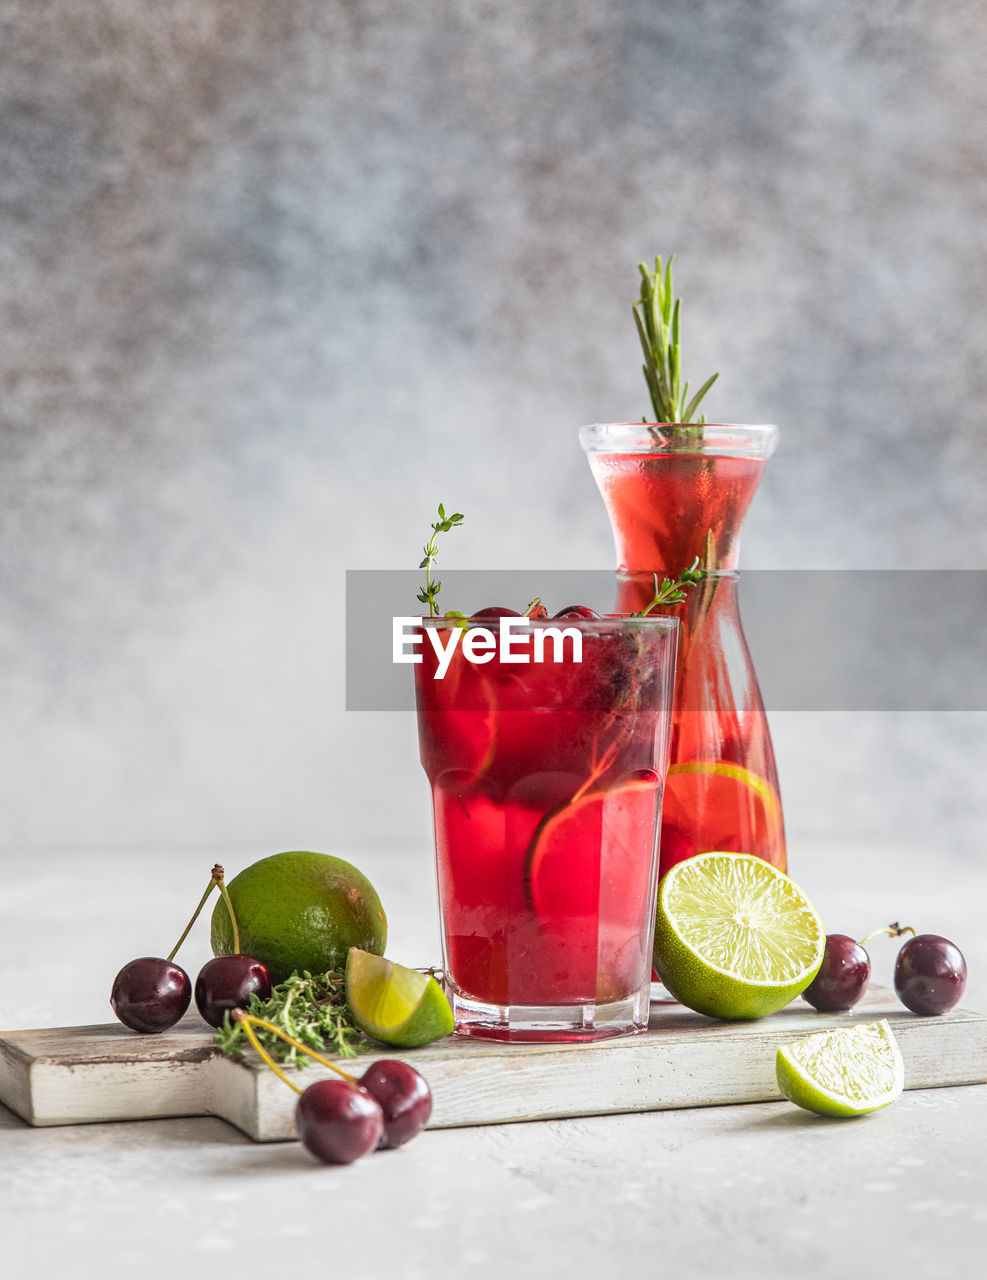 Lemonade or non-alcohol cocktail with cherry and lime. summer refreshment drink.